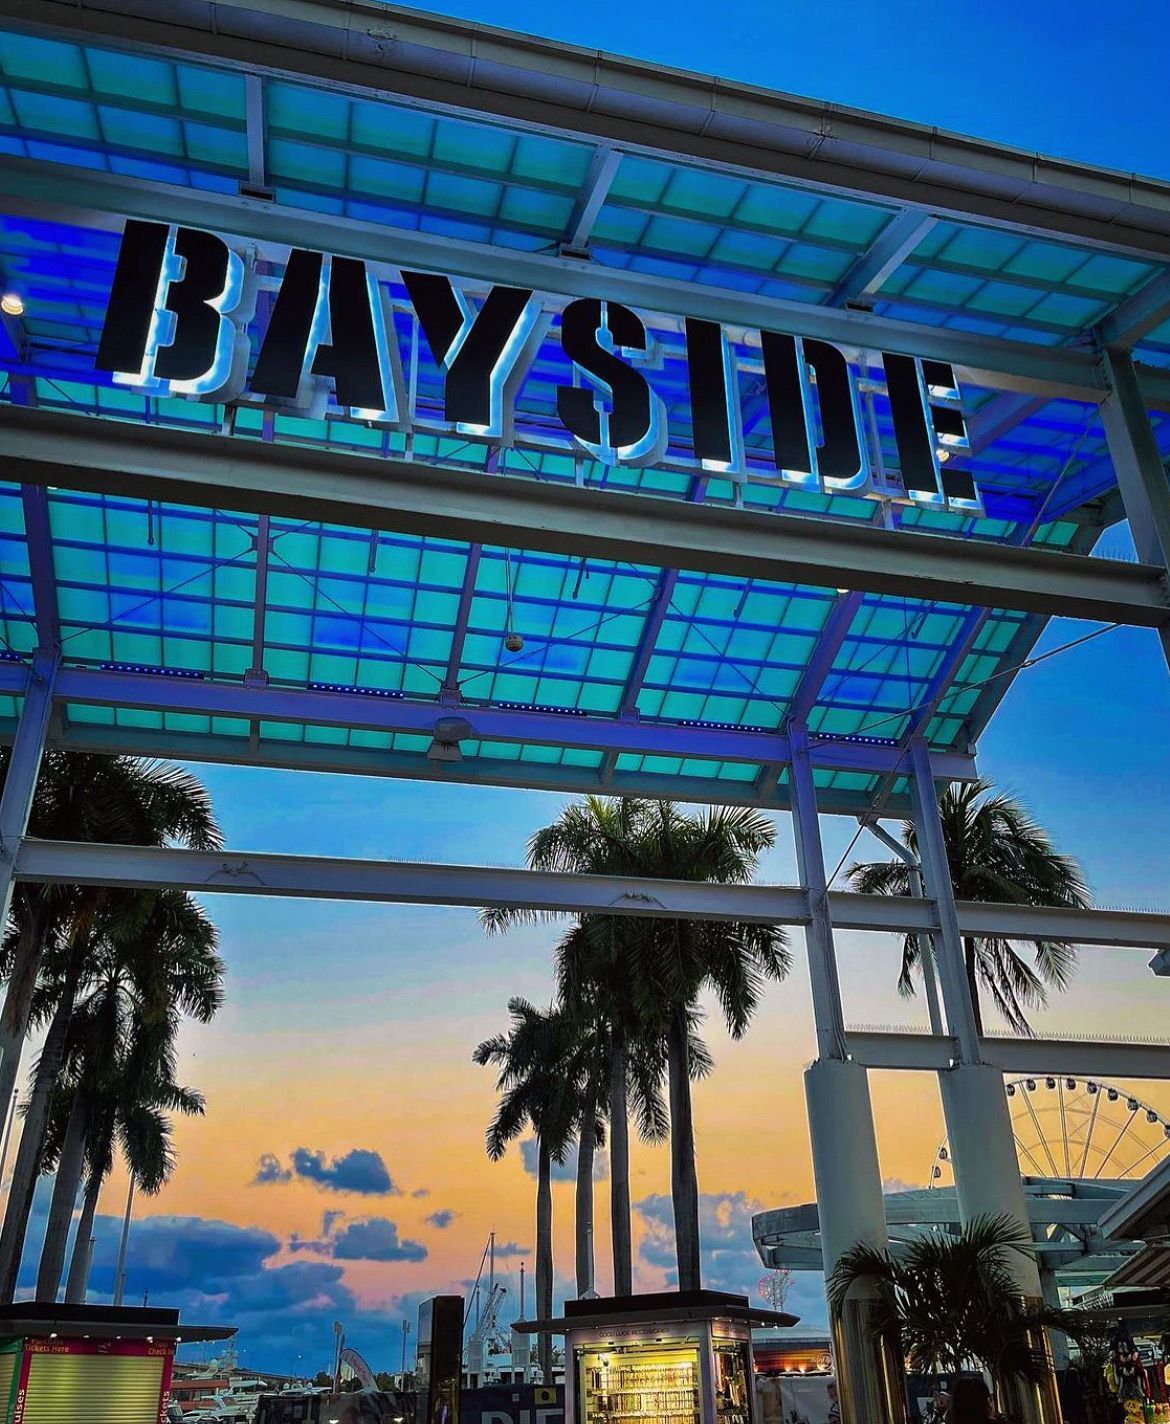 Bayside Marketplace during the Miami Sunset! Explore Miami. South Beach!